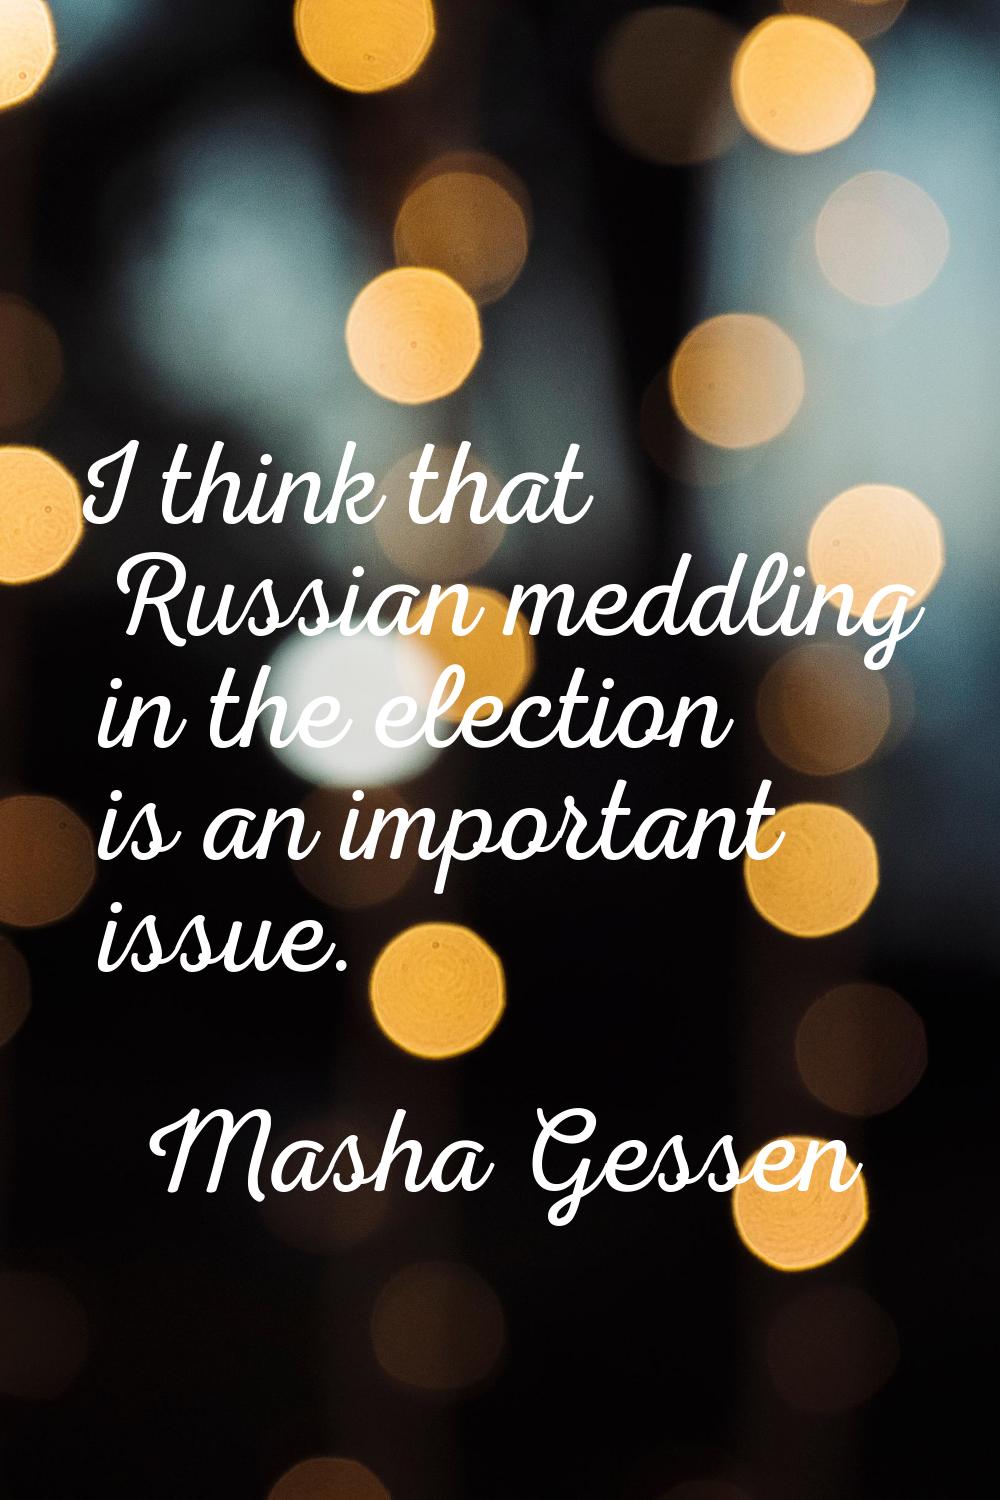 I think that Russian meddling in the election is an important issue.